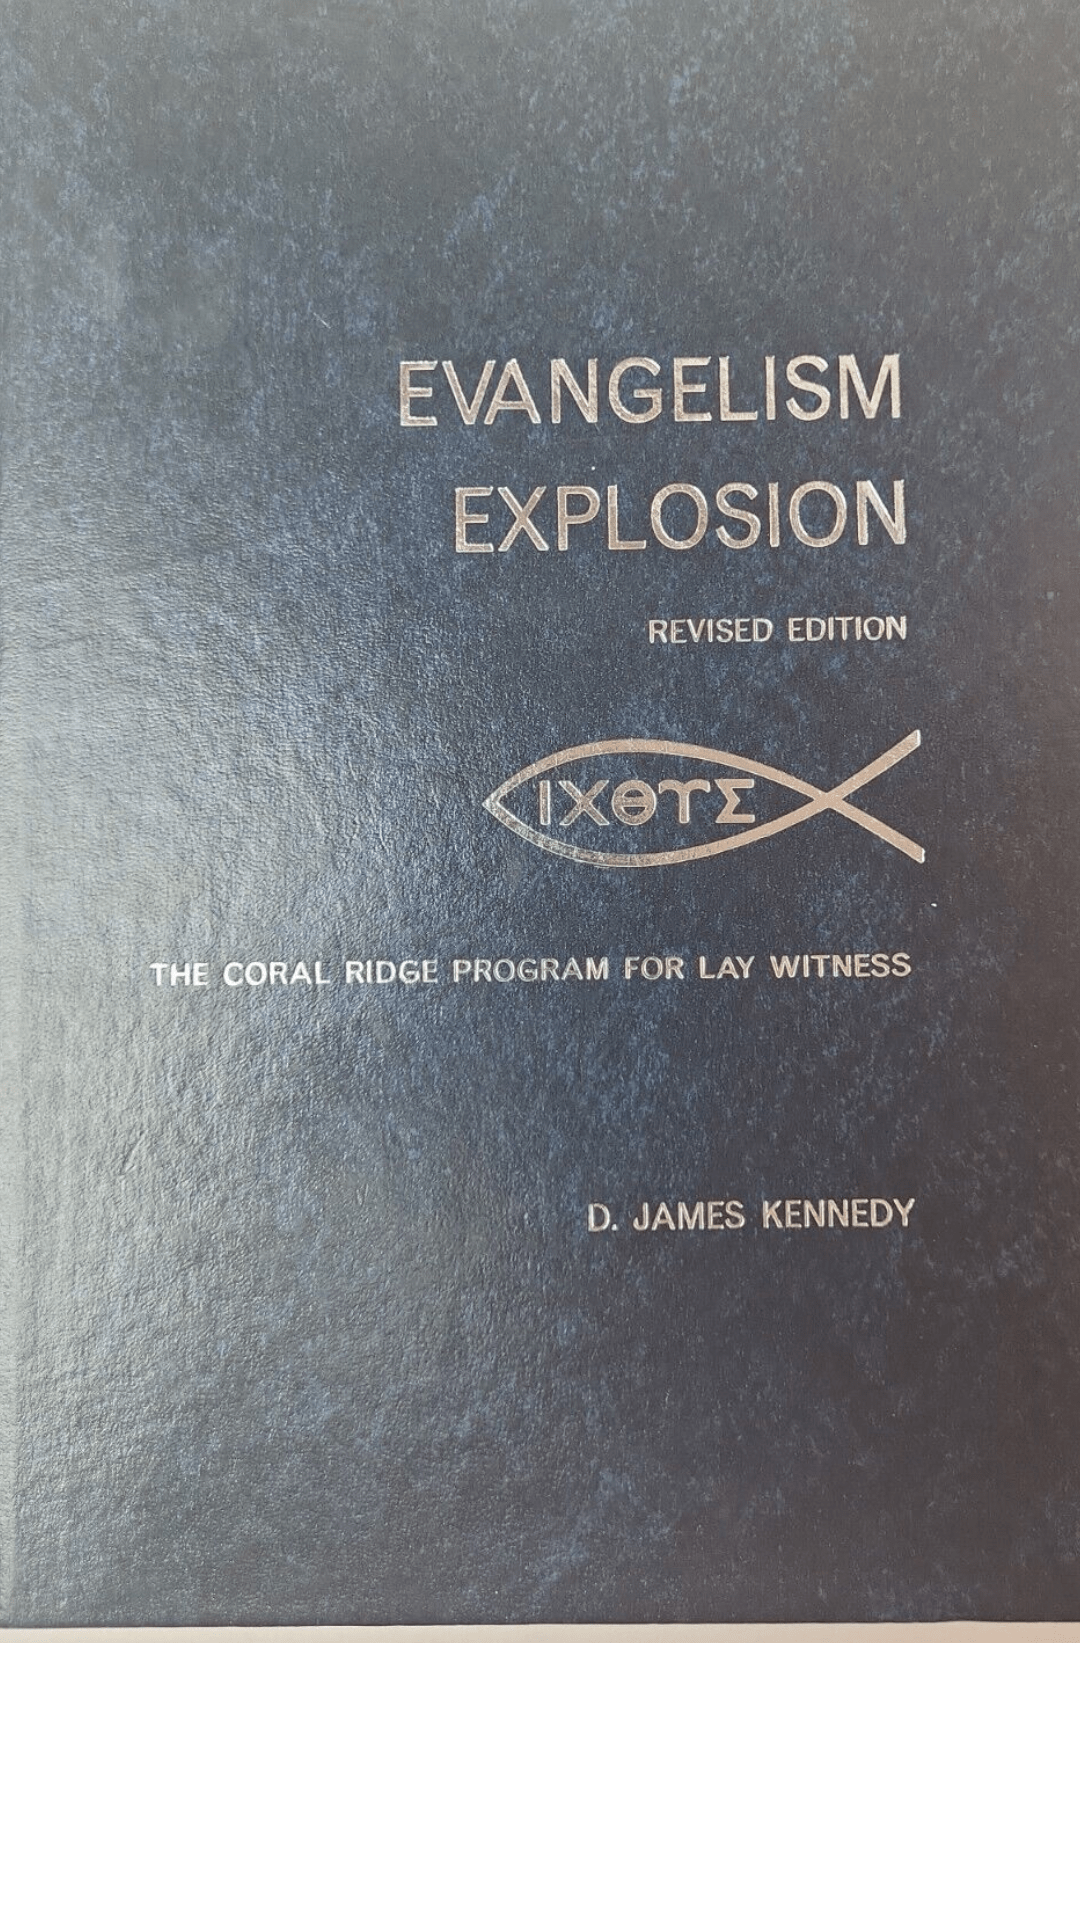 Evangelism Explosion by D. James Kennedy